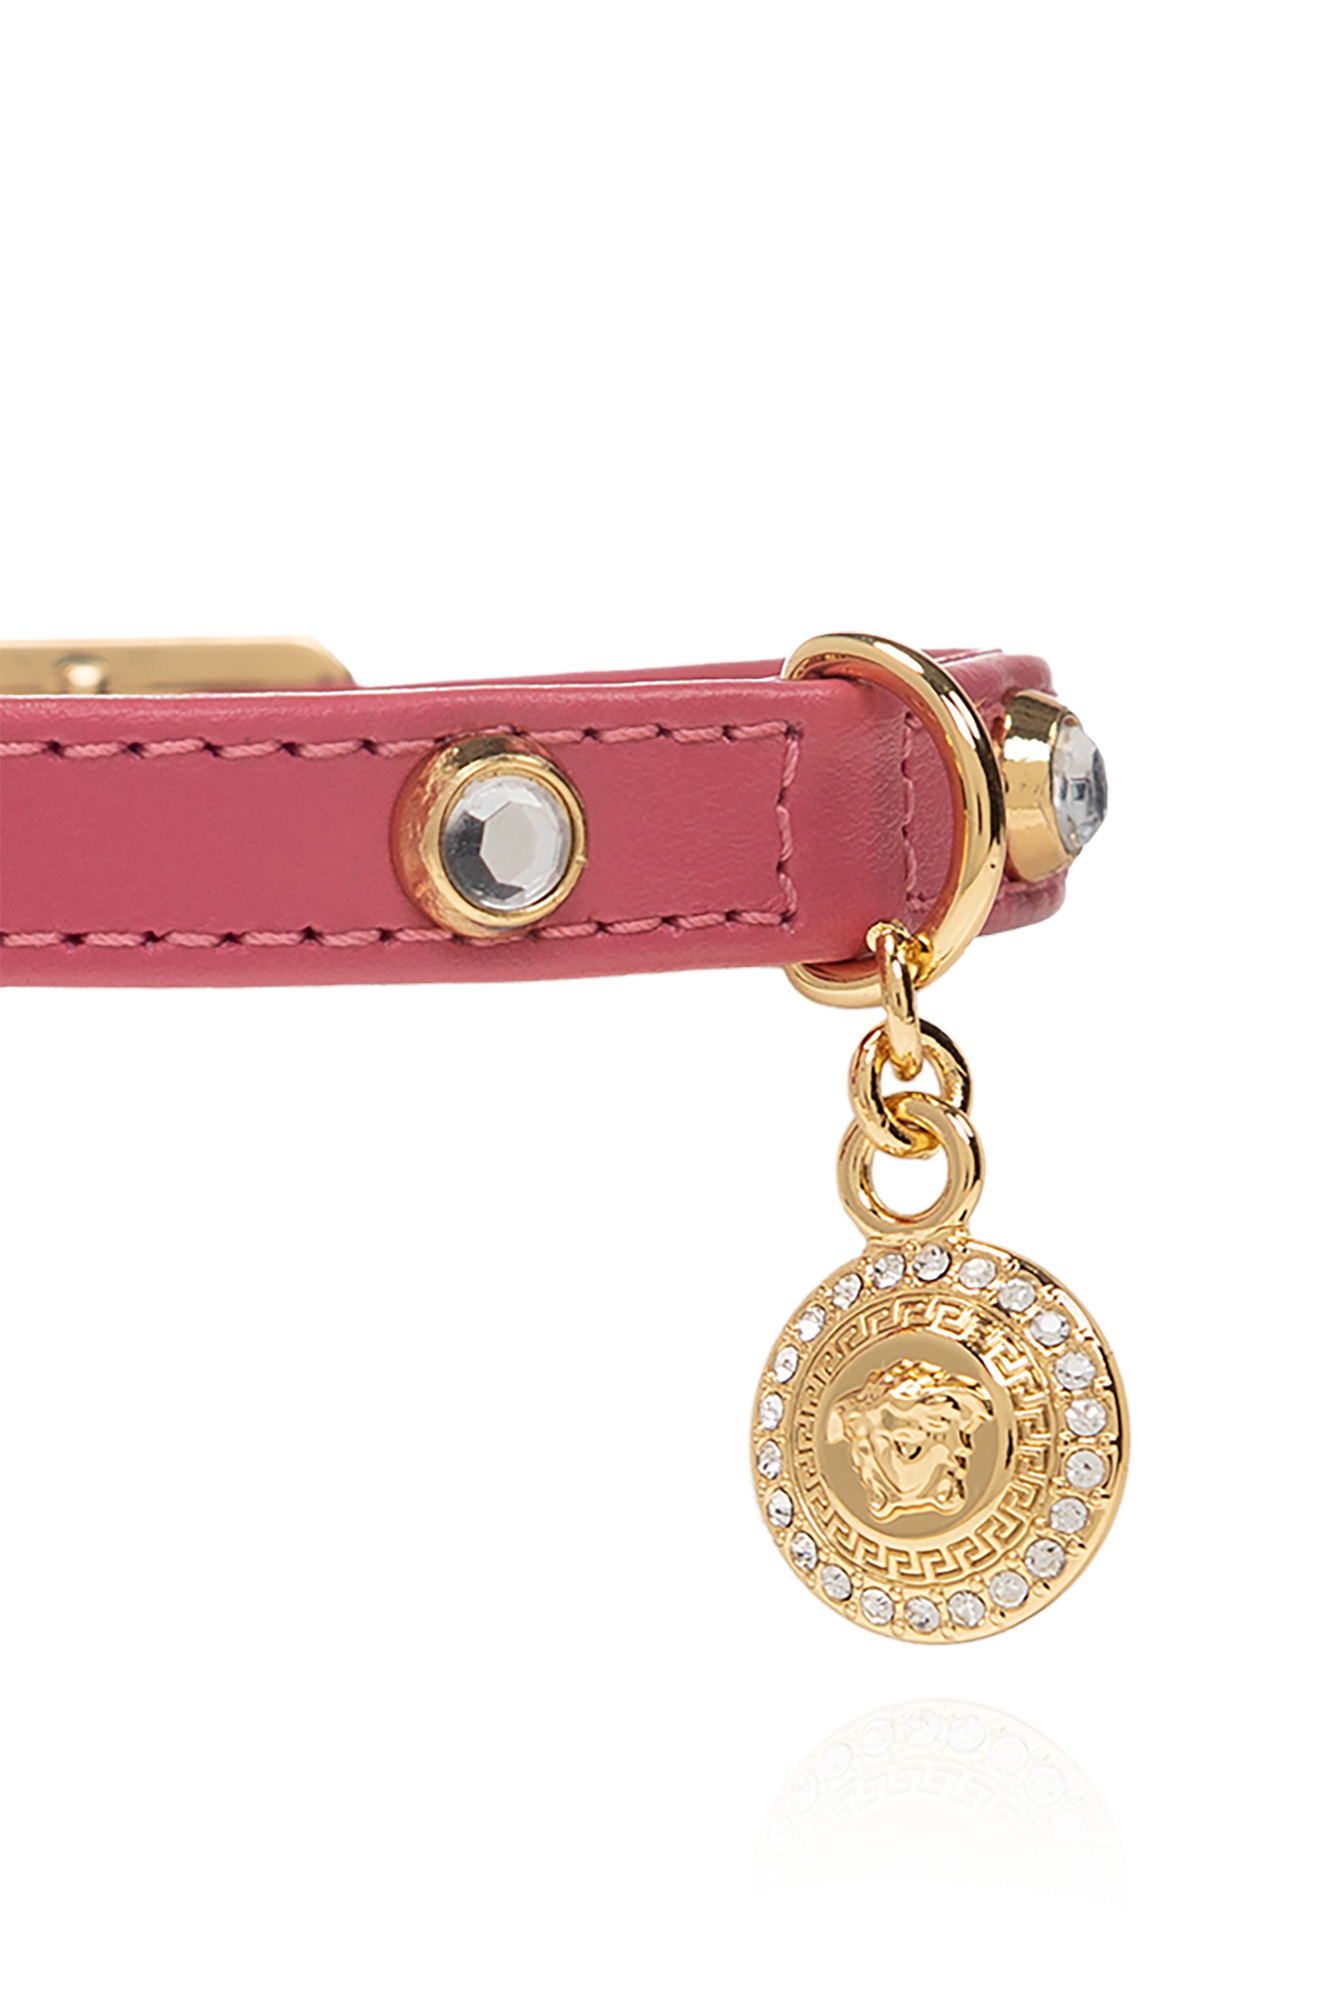 Versace Studded Leather Pet Collar - Pink